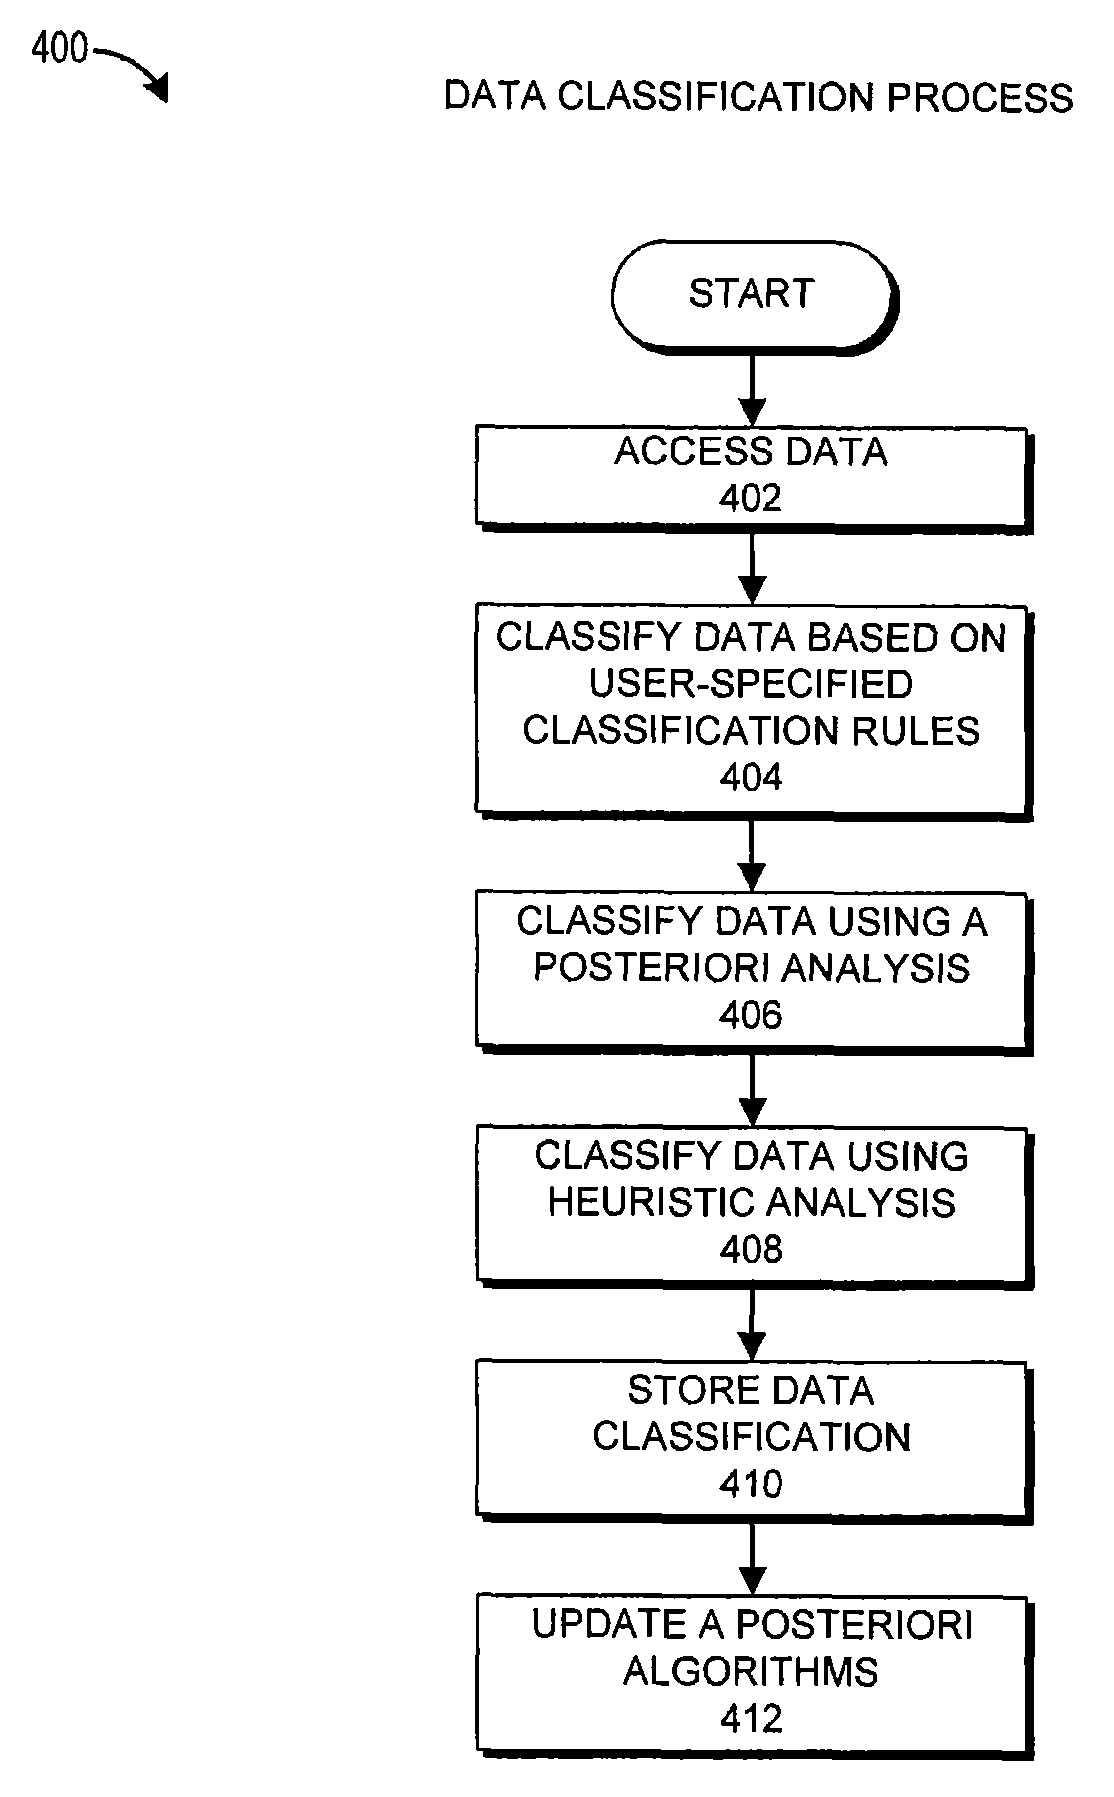 Aggregation and classification of secure data